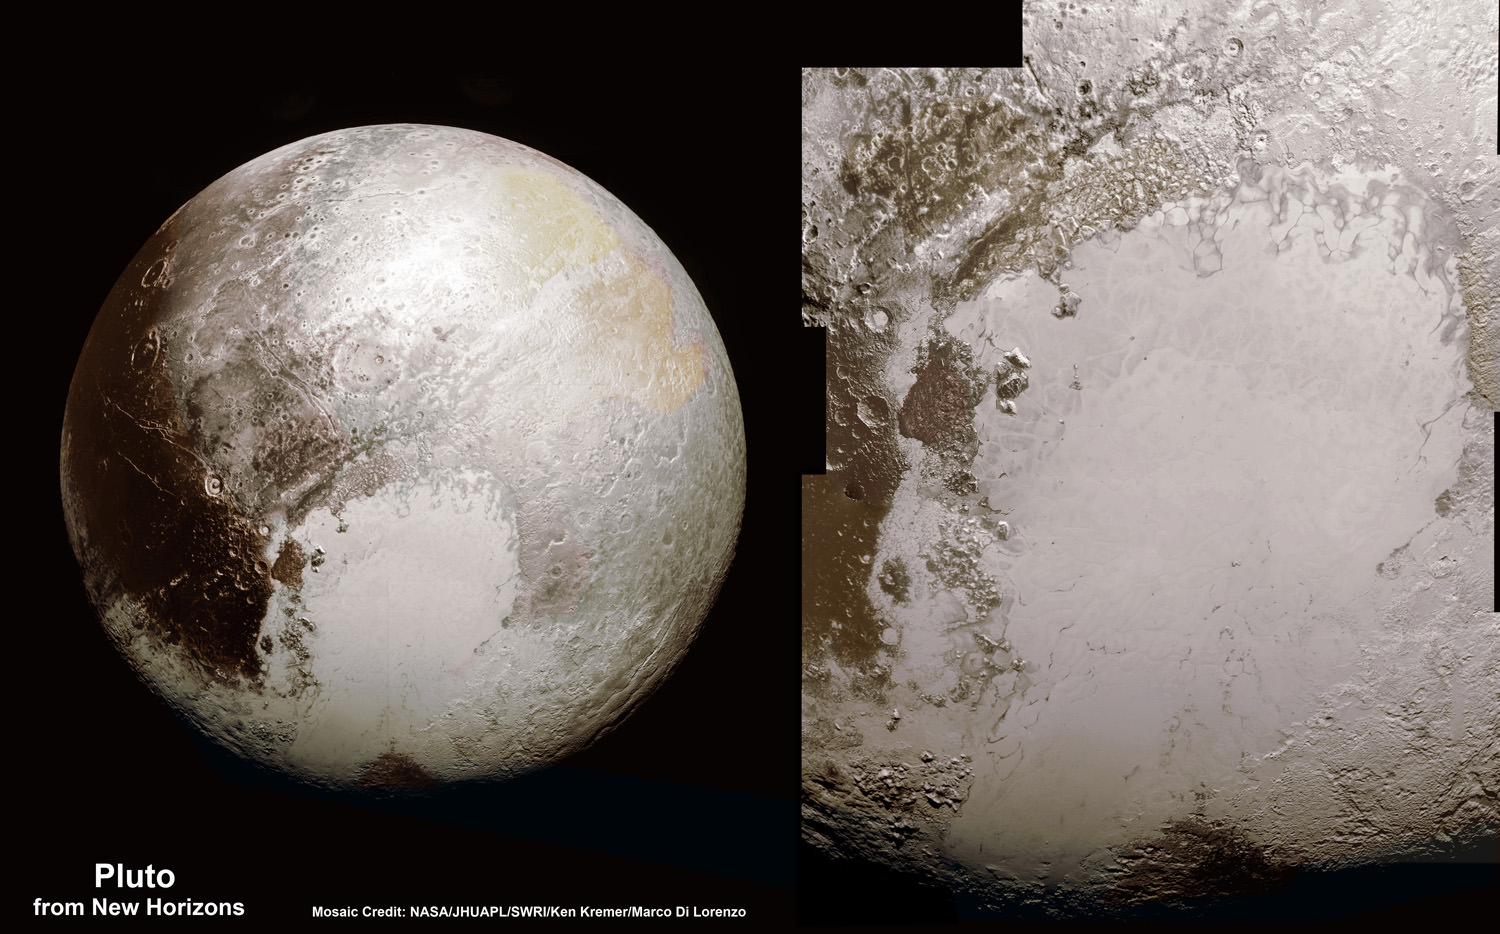 This global mosaic view of Pluto was created from the latest high-resolution images to be downlinked from NASA’s New Horizons spacecraft and released on Sept. 11, 2015.   The images were taken as New Horizons flew past Pluto on July 14, 2015, from a distance of 50,000 miles (80,000 kilometers).  This mosaic was stitched from over two dozen raw images captured by the LORRI imager and colorized.  Right side mosaic comprises twelve highest resolution views of Tombaugh Regio heart shaped feature and shows objects as small as 0.5 miles (0.8 kilometers) in size.  Credits: NASA/Johns Hopkins University Applied Physics Laboratory/Southwest Research Institute/ Ken Kremer/kenkremer.com/Marco Di Lorenzo